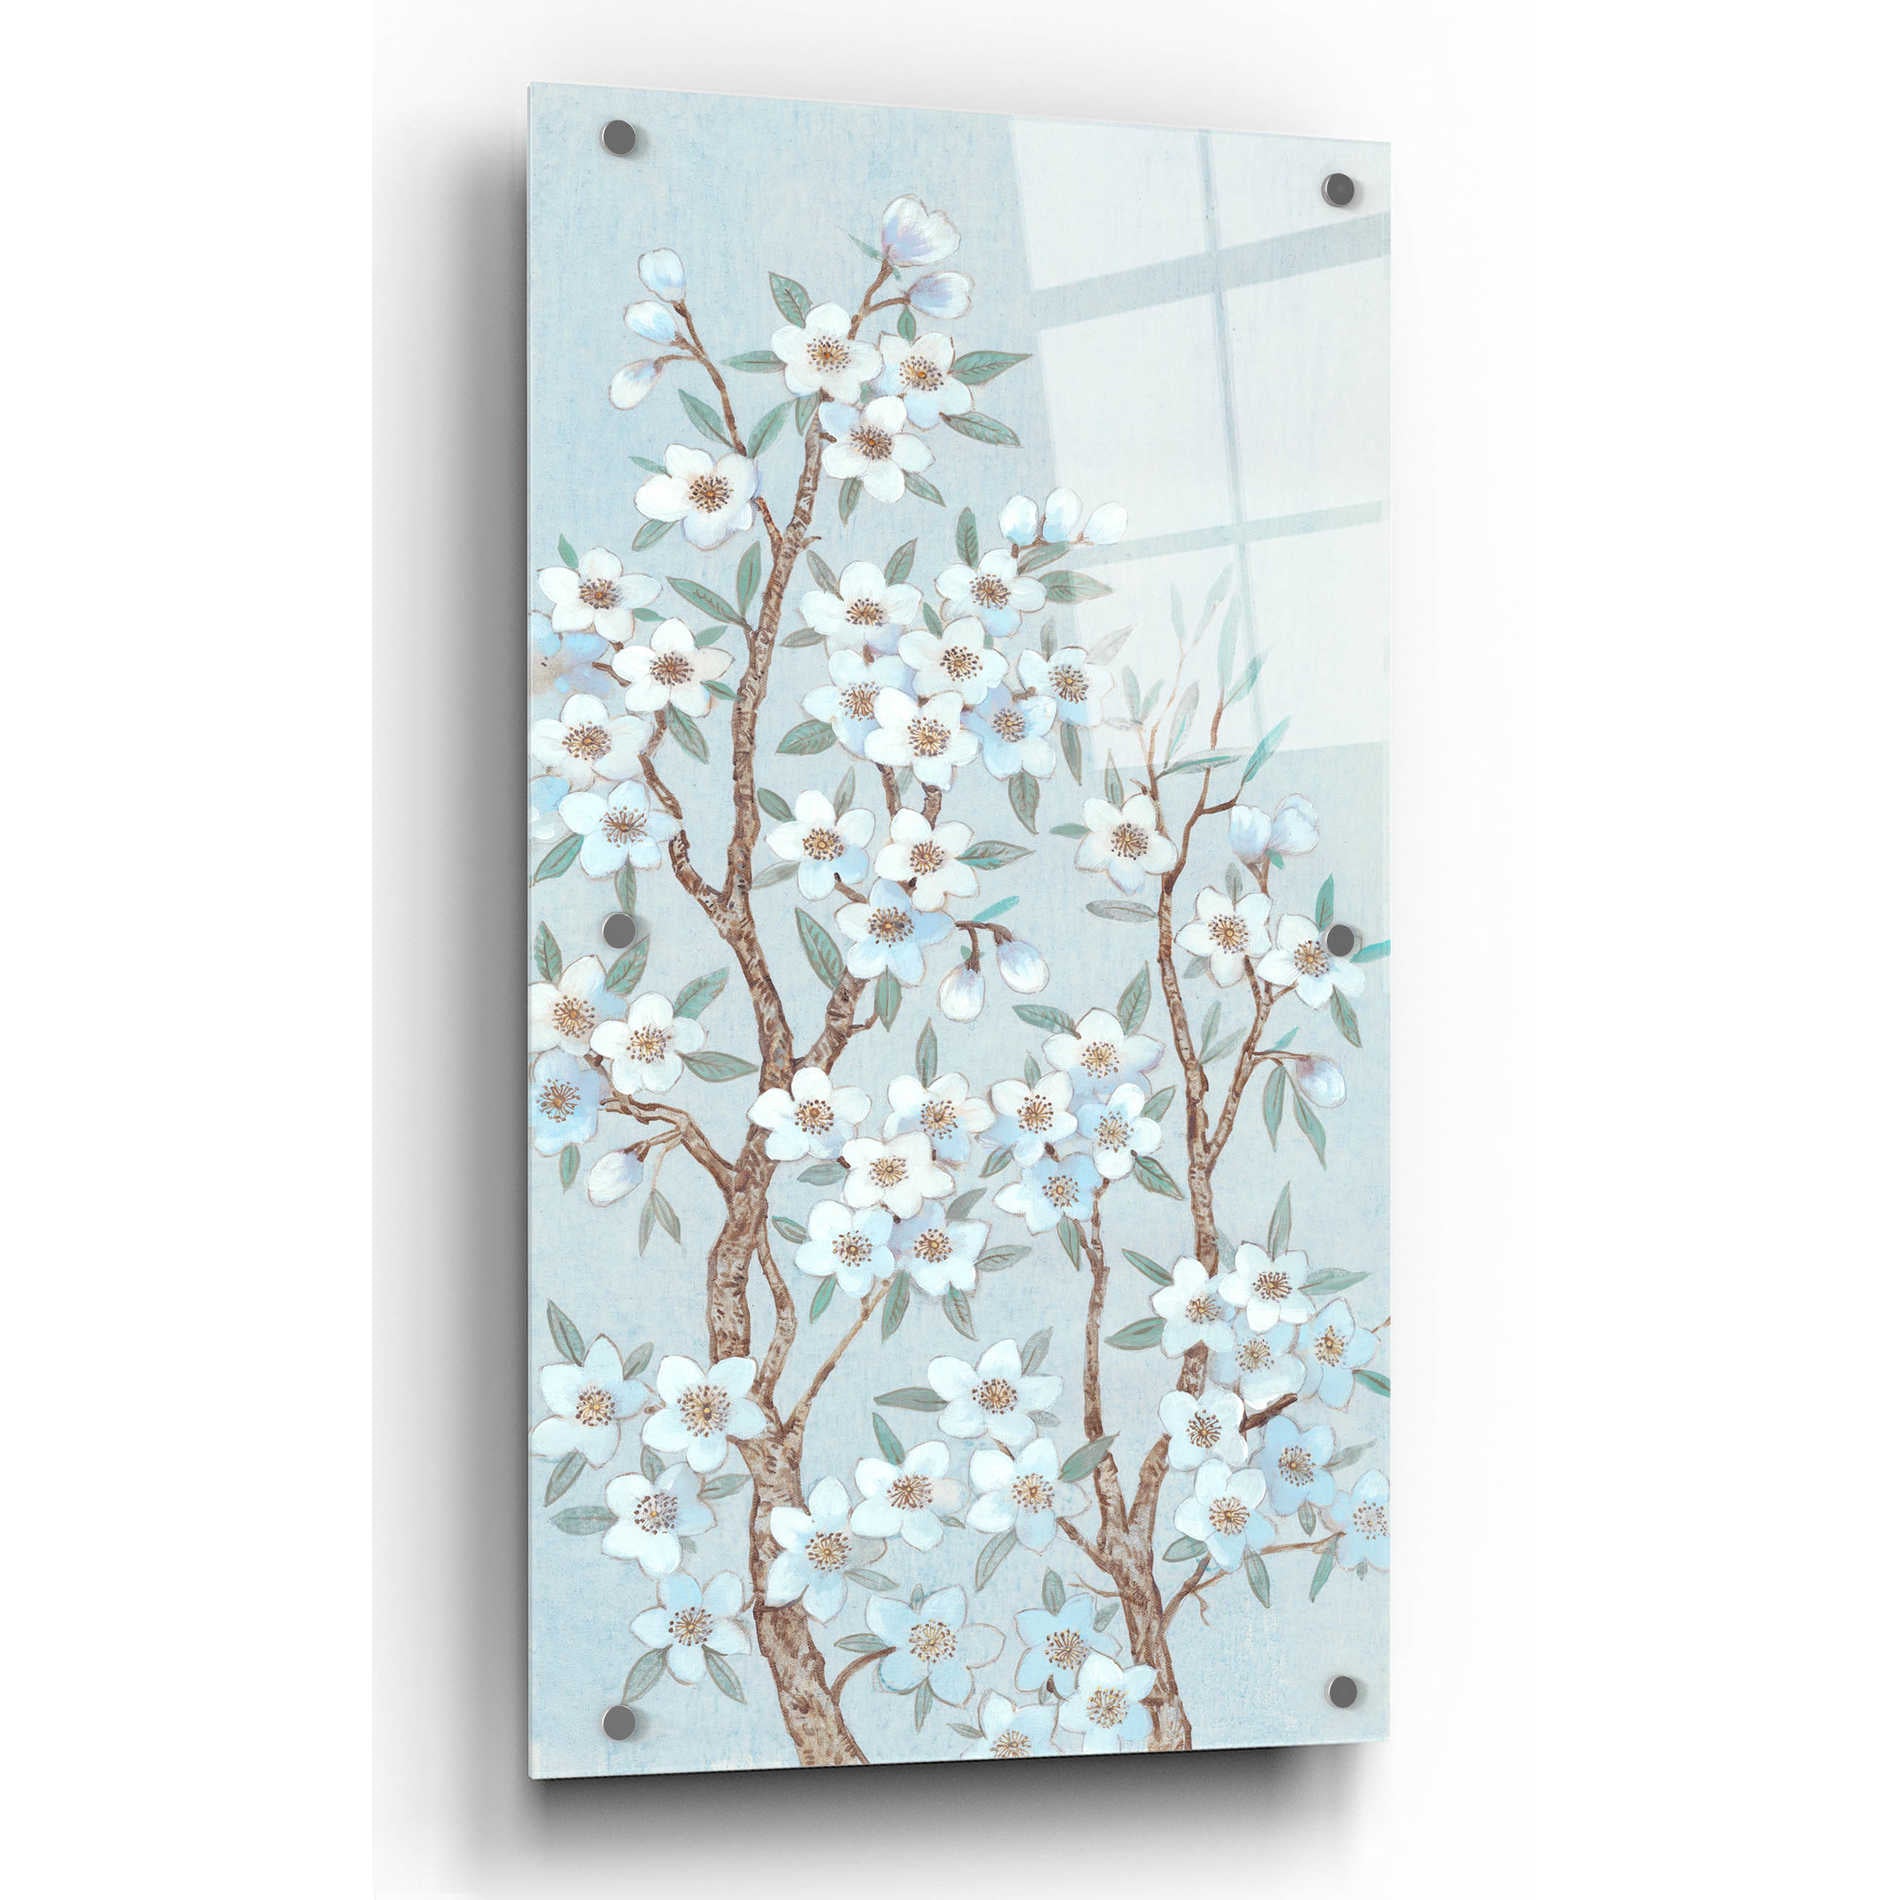 Epic Art 'Branches of Blossoms II' by Tim O'Toole, Acrylic Glass Wall Art,24x48